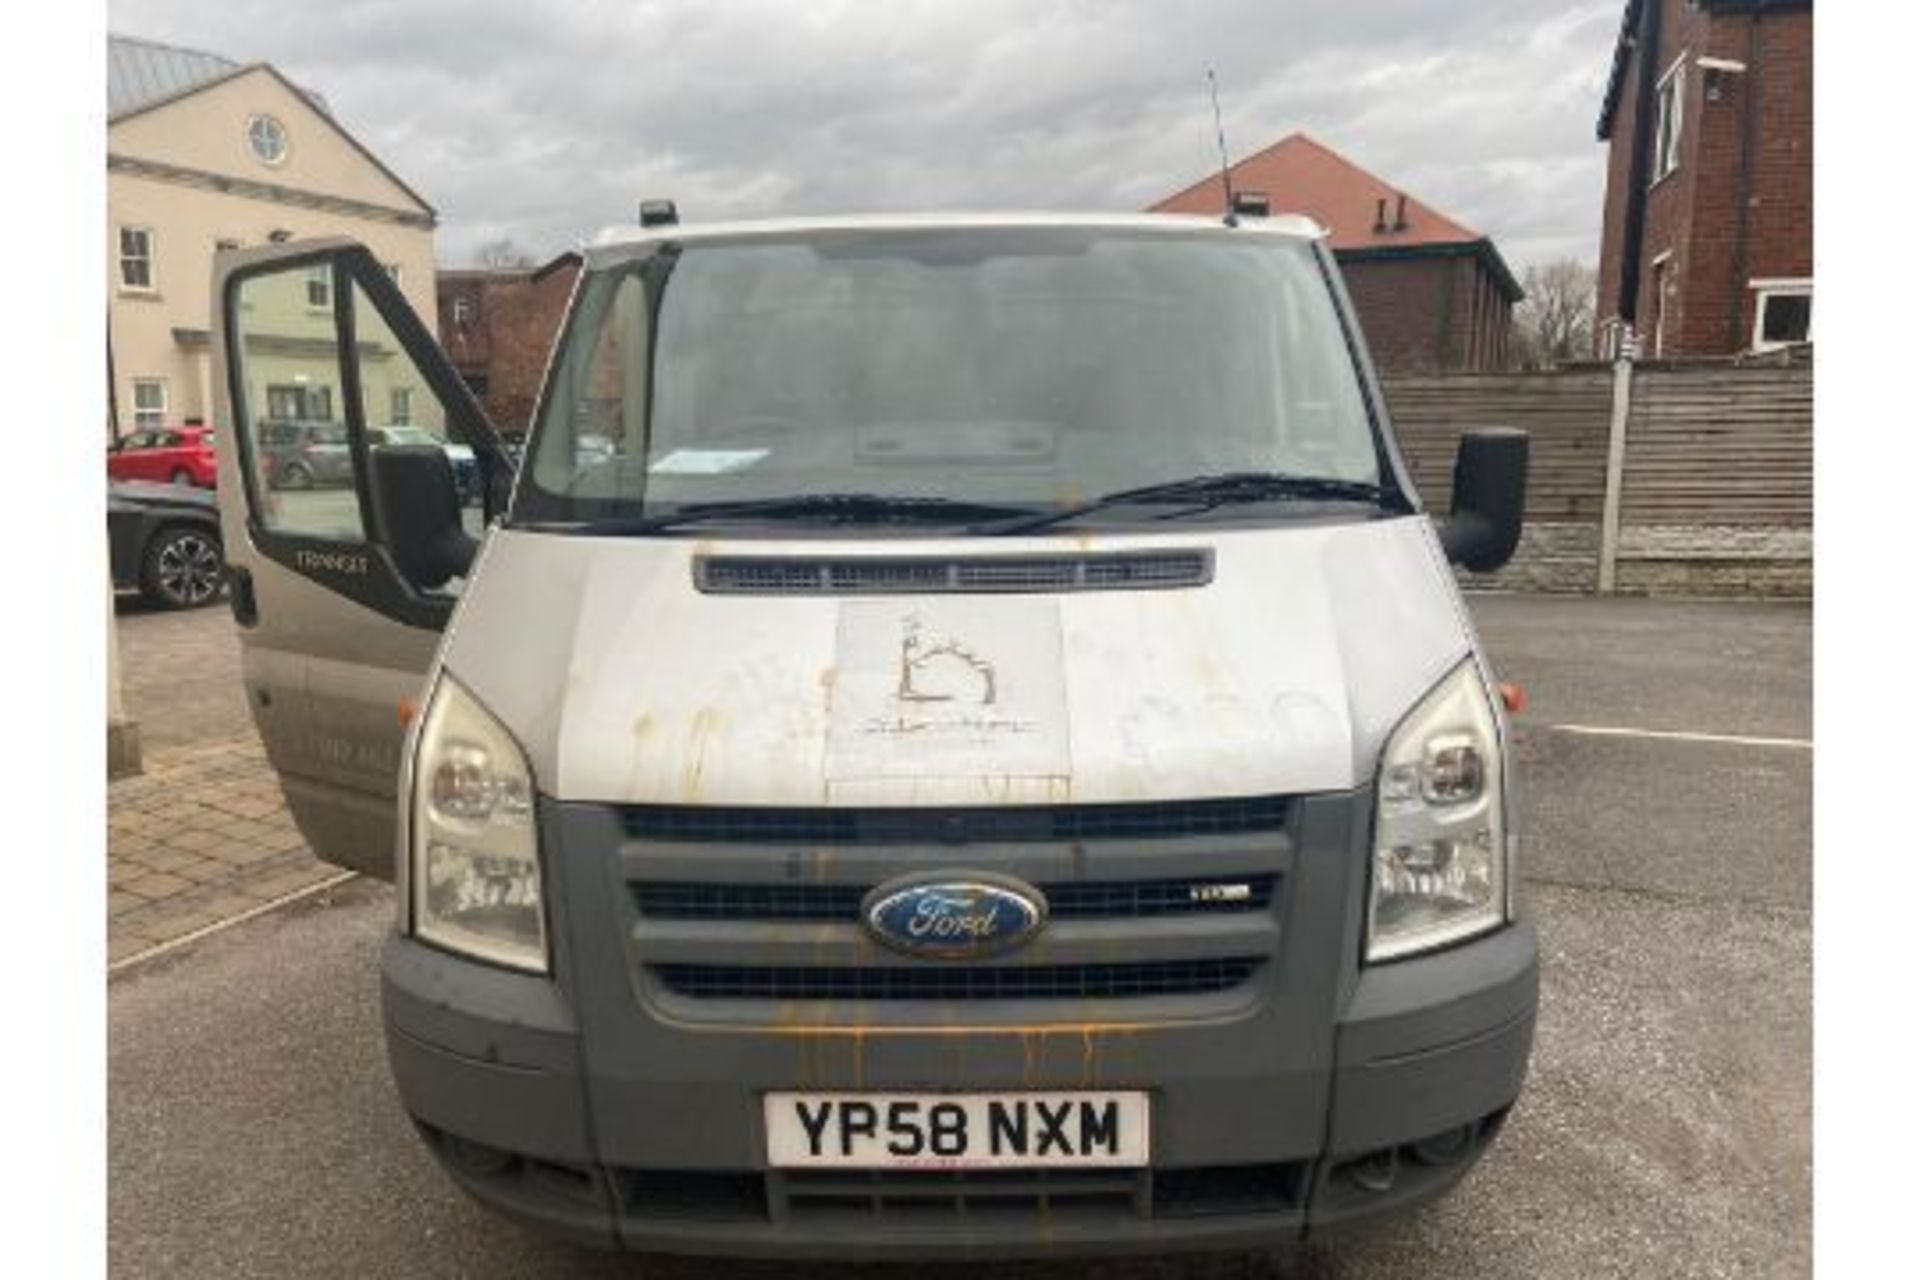 ENTRY DIRECT FROM LOCAL AUTHORITY Ford Transit 100 - Image 4 of 18